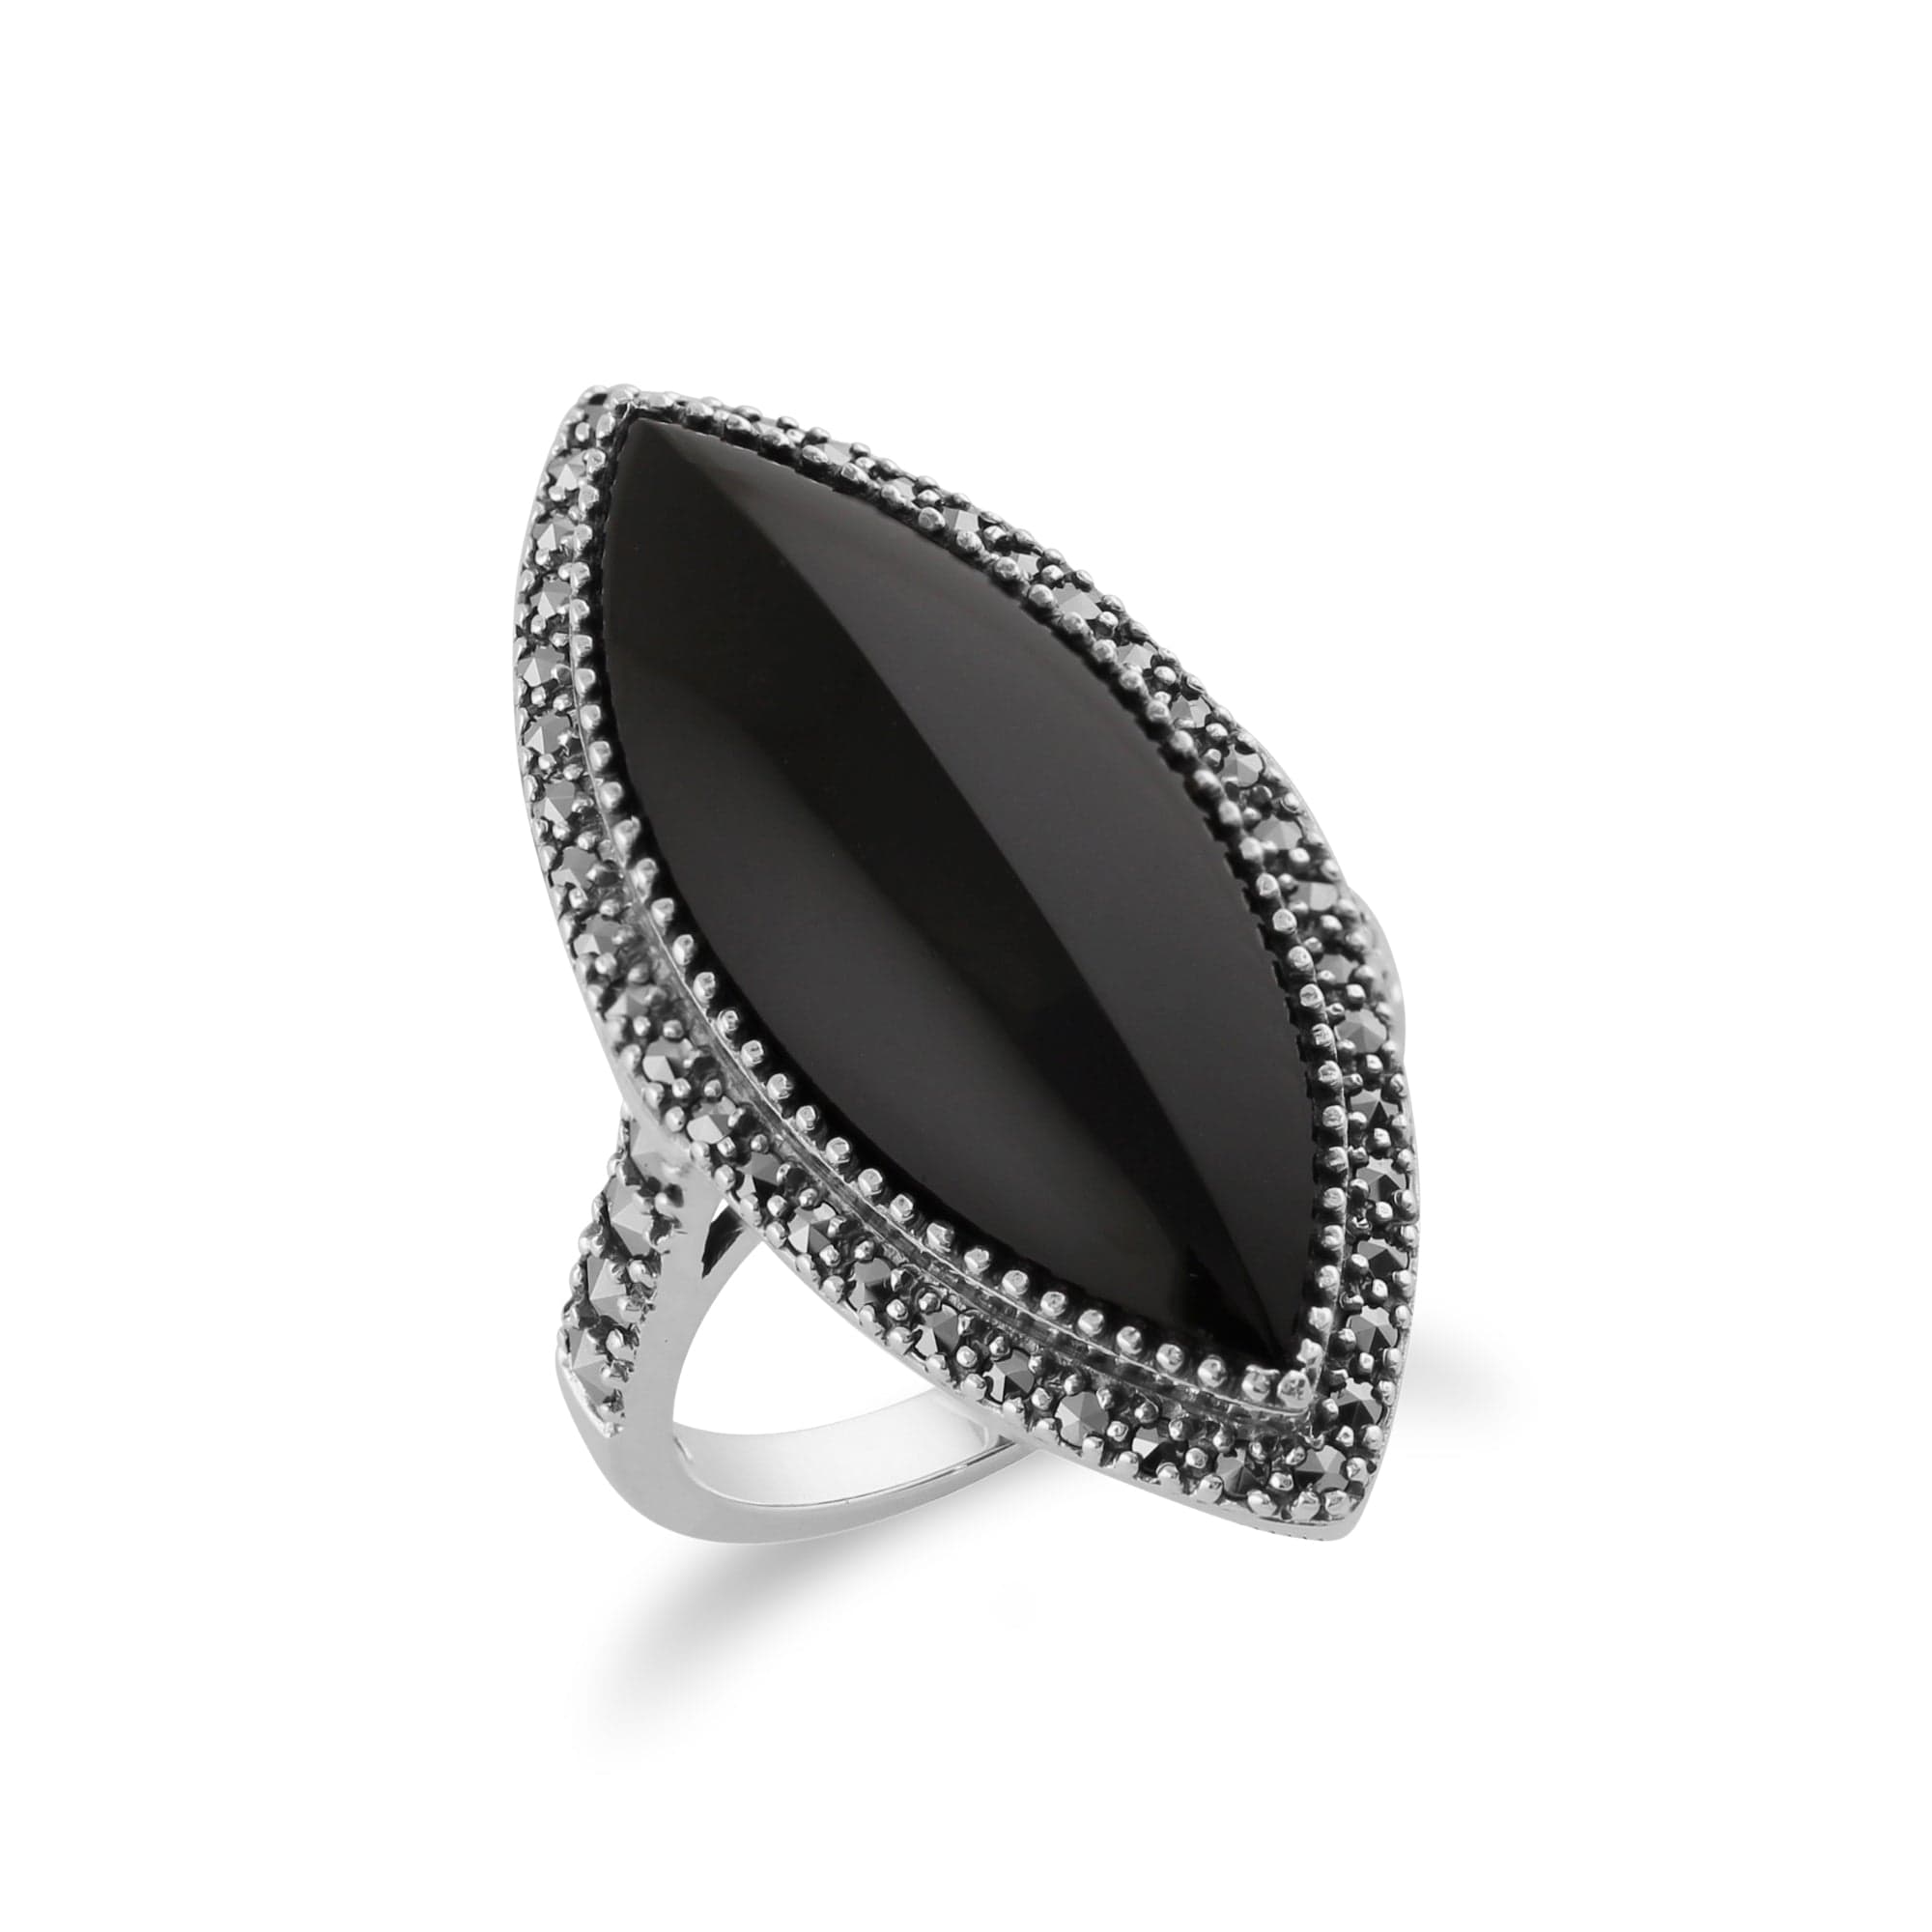 214R394101925 Art Deco Style Marquise Black Onyx & Marcasite Statement Ring in 925 Sterling Silver 2